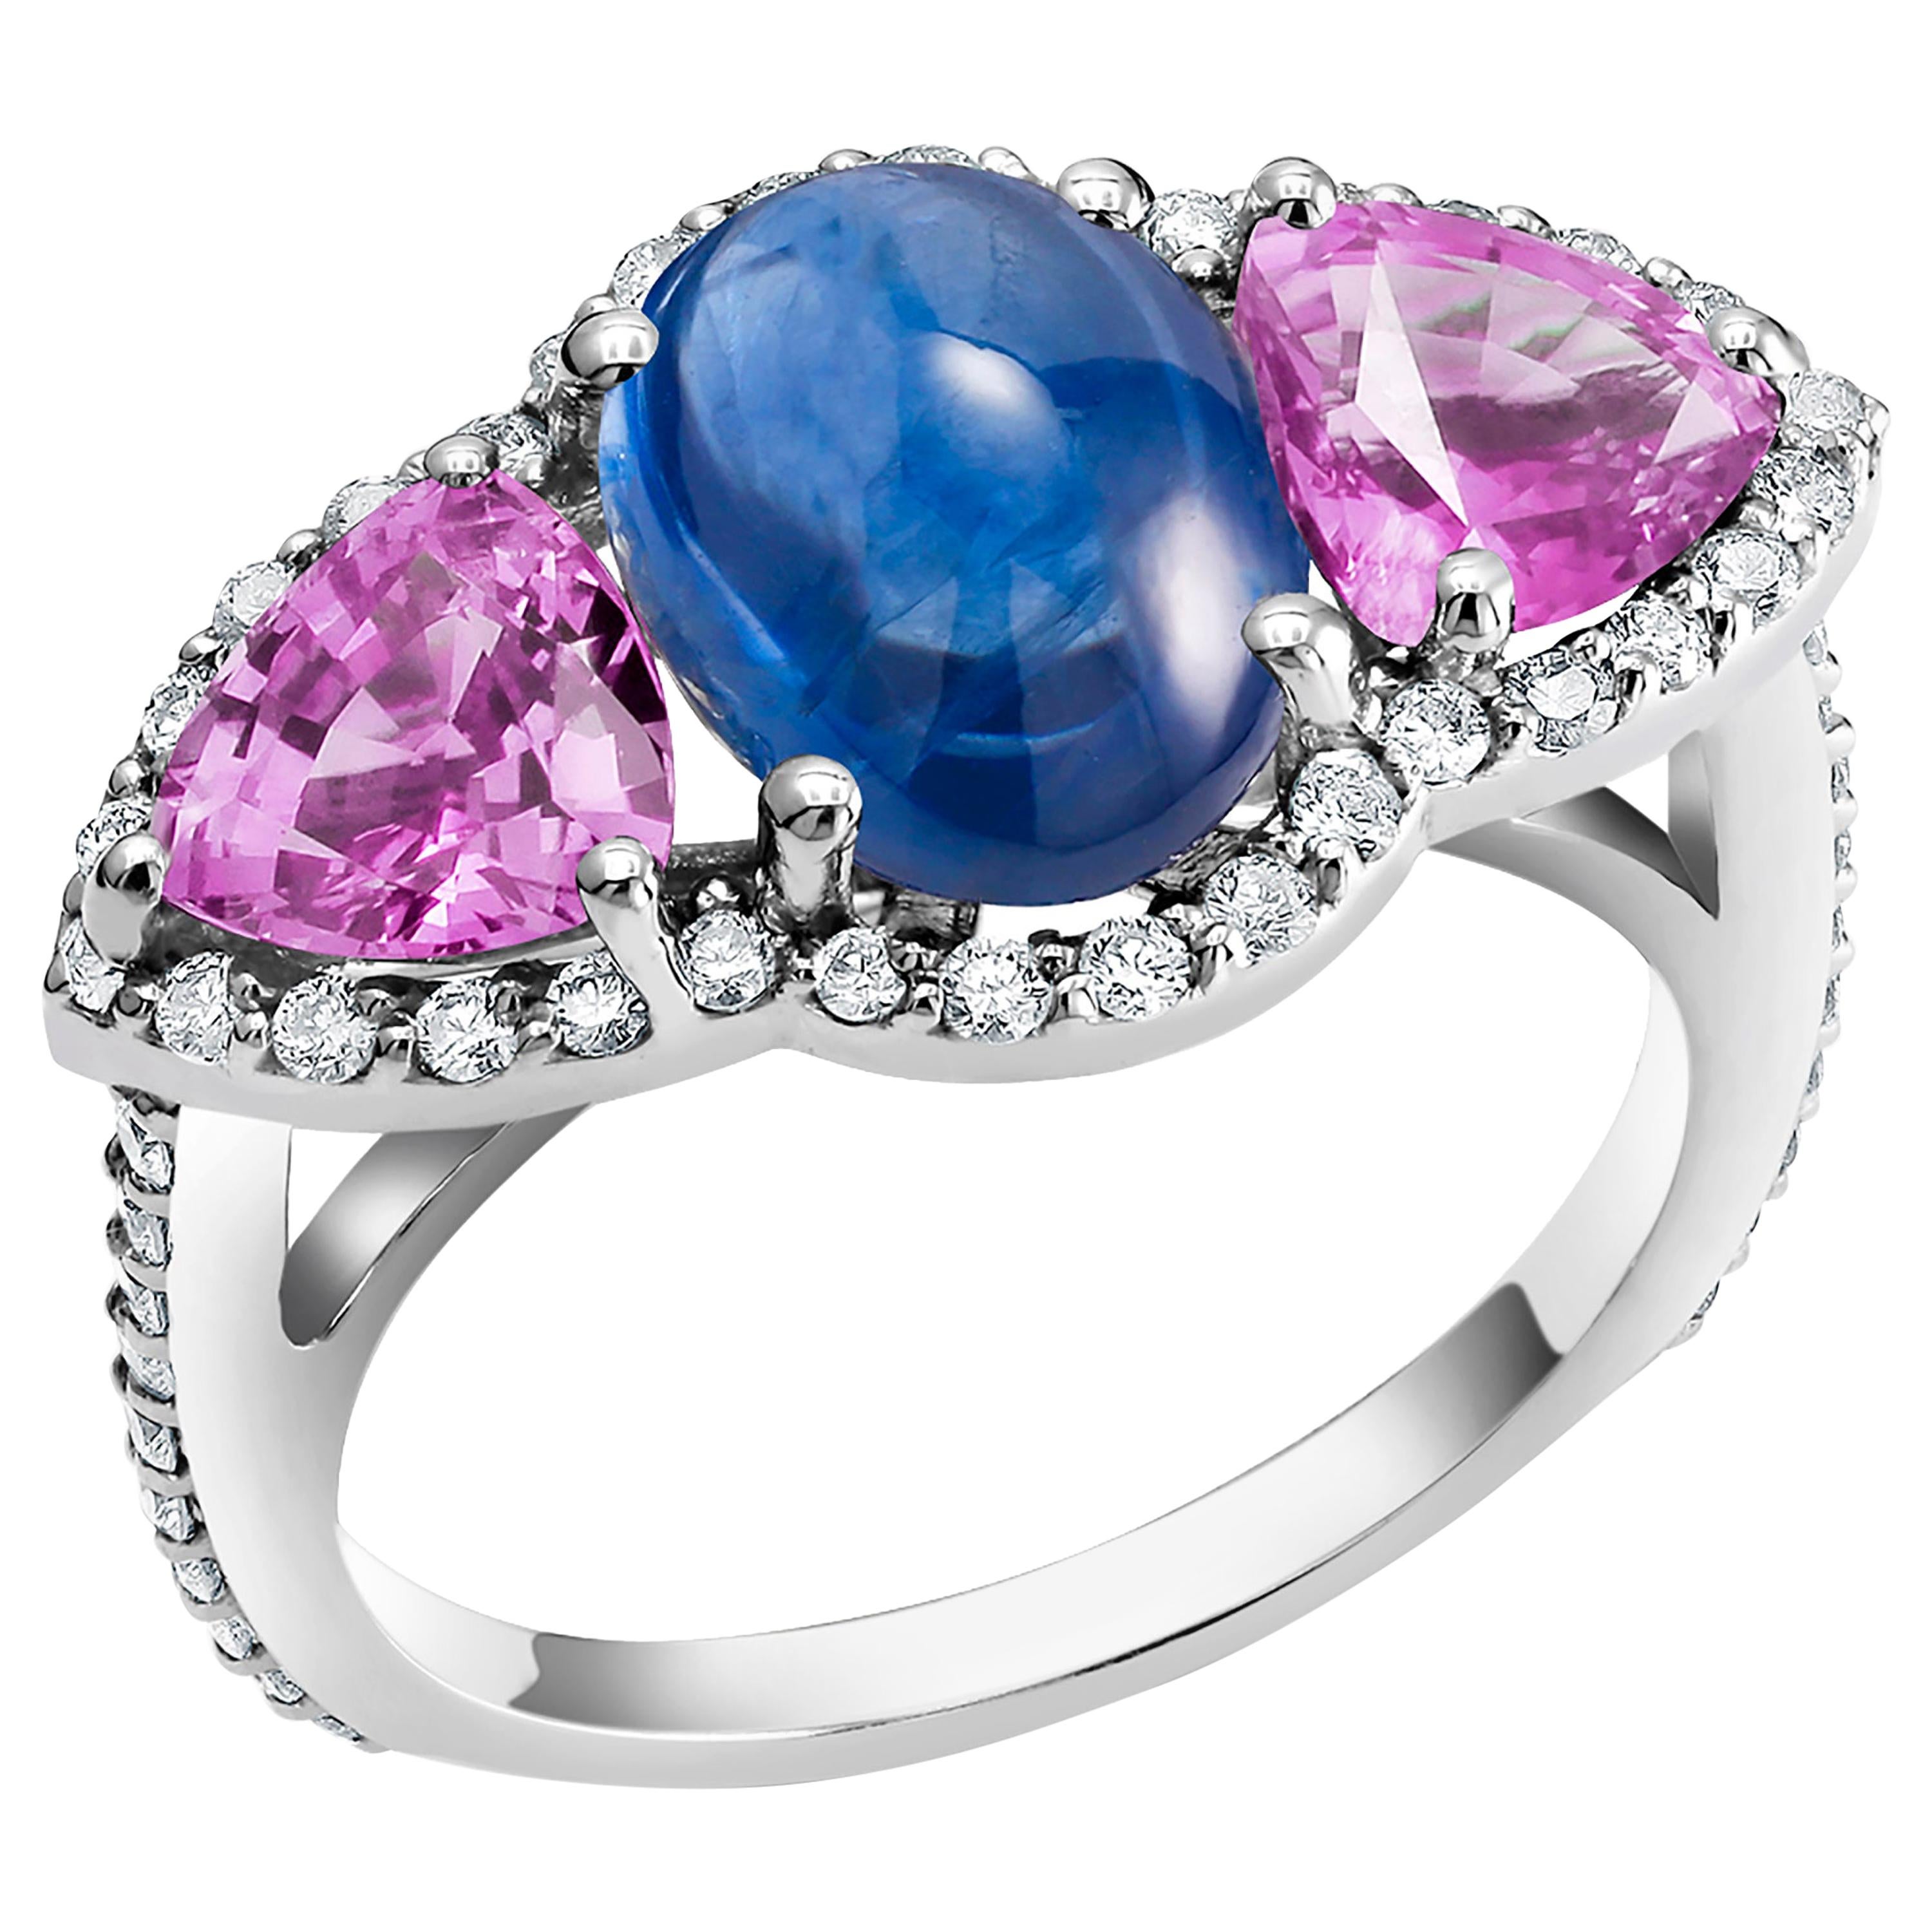 Gem Stone King 1.78 Ct Oval Pink Created Sapphire White Diamond 925 Sterling Silver Mens Ring